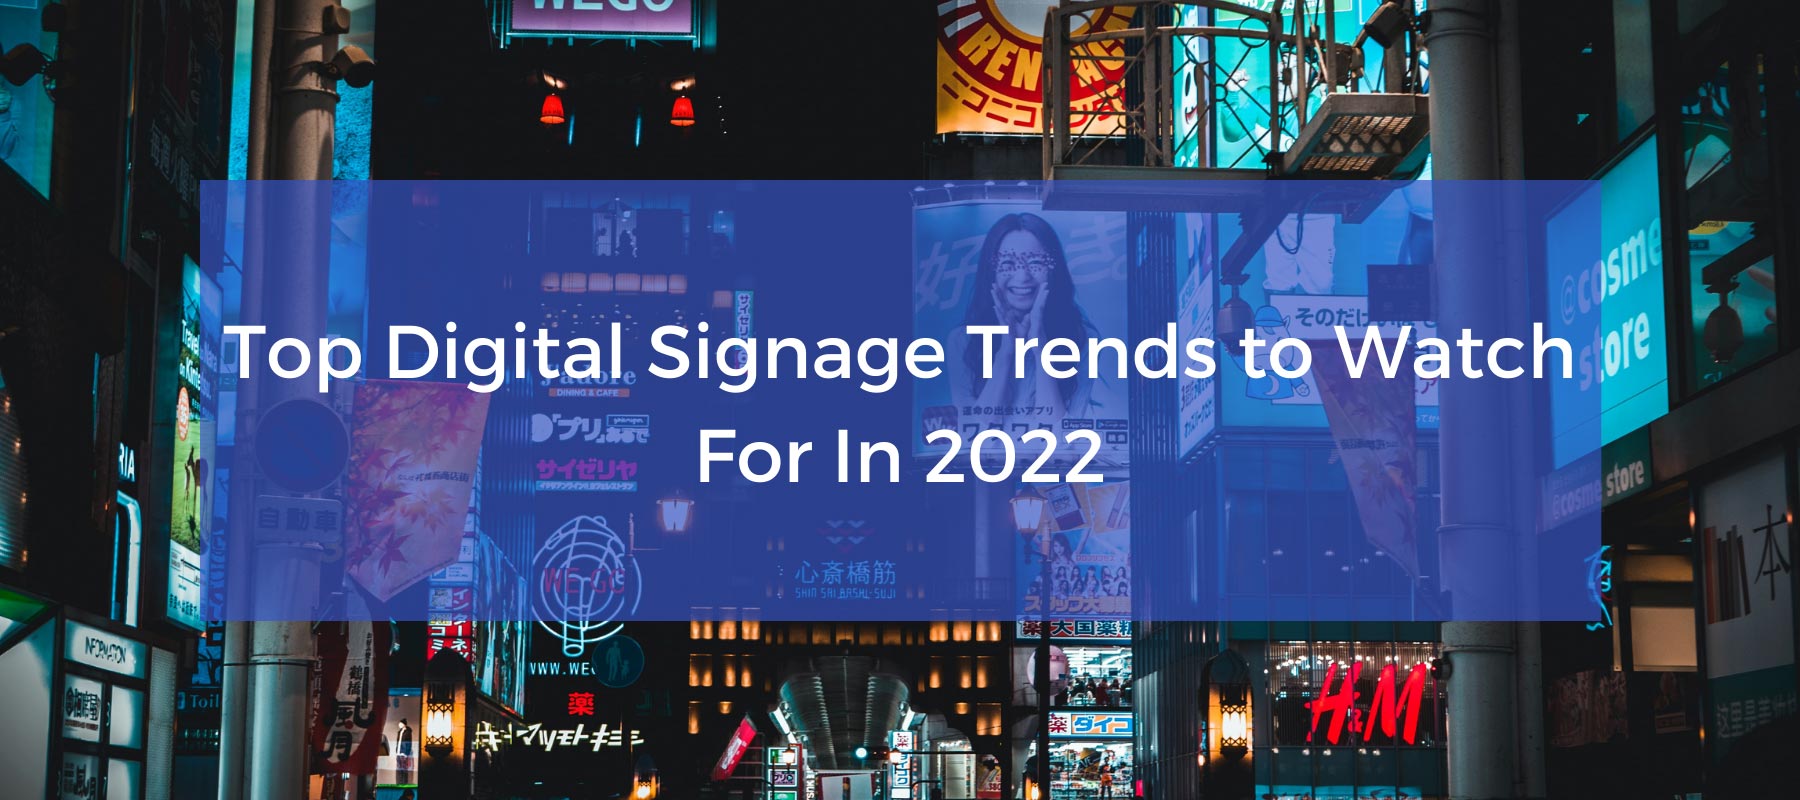 Top Digital Signage Trends to Watch For In 2022